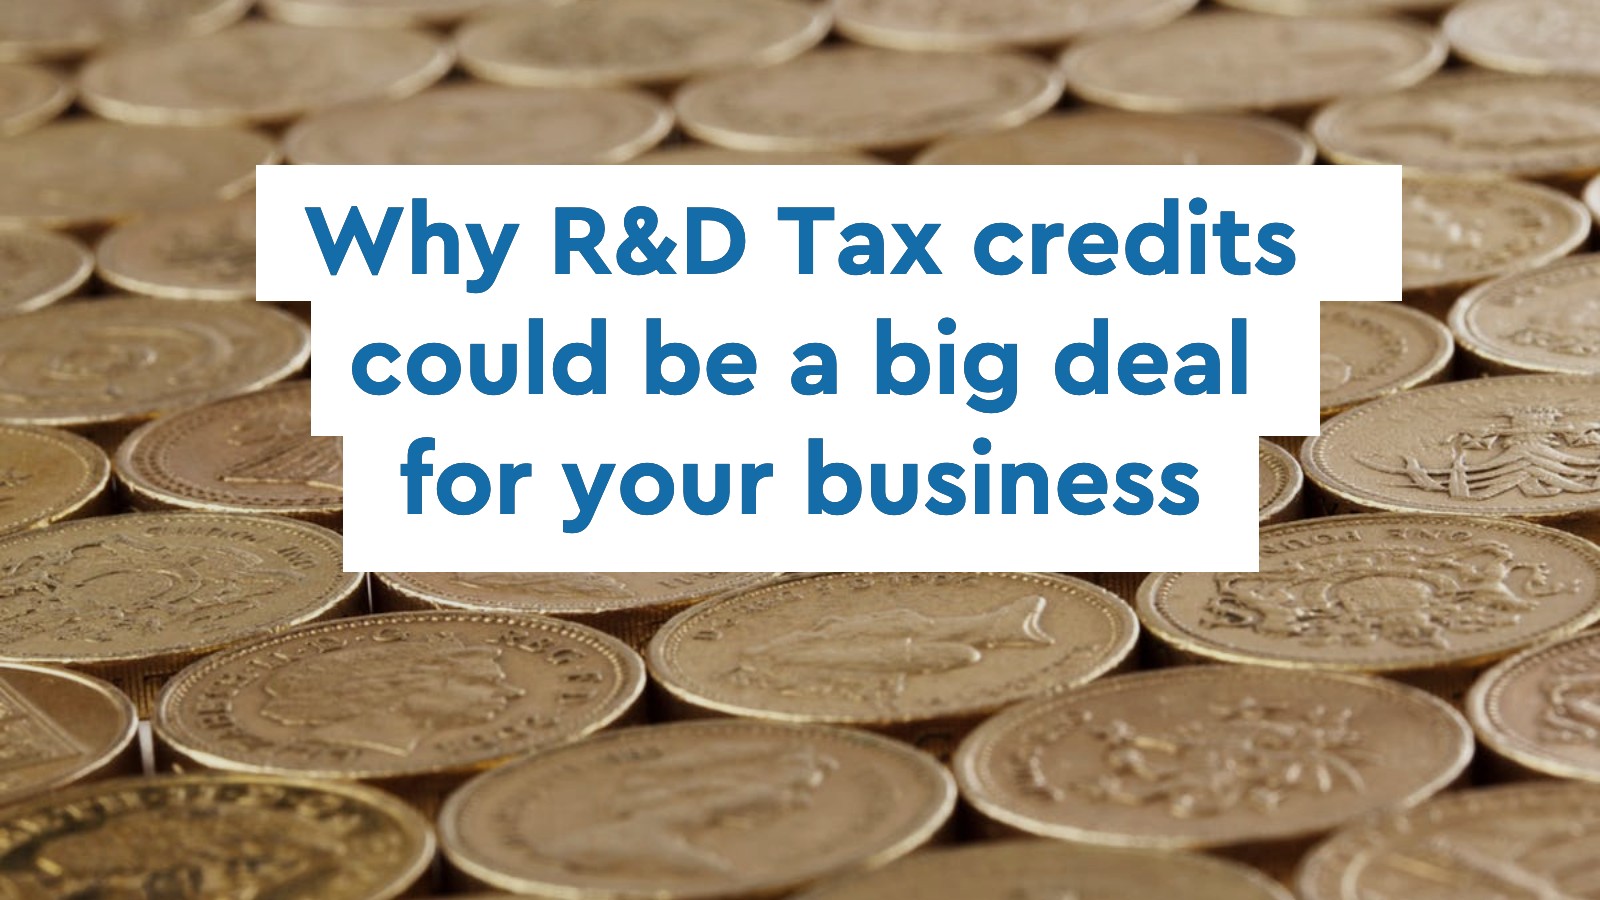 Why R&D tax credits could be a big deal for your business